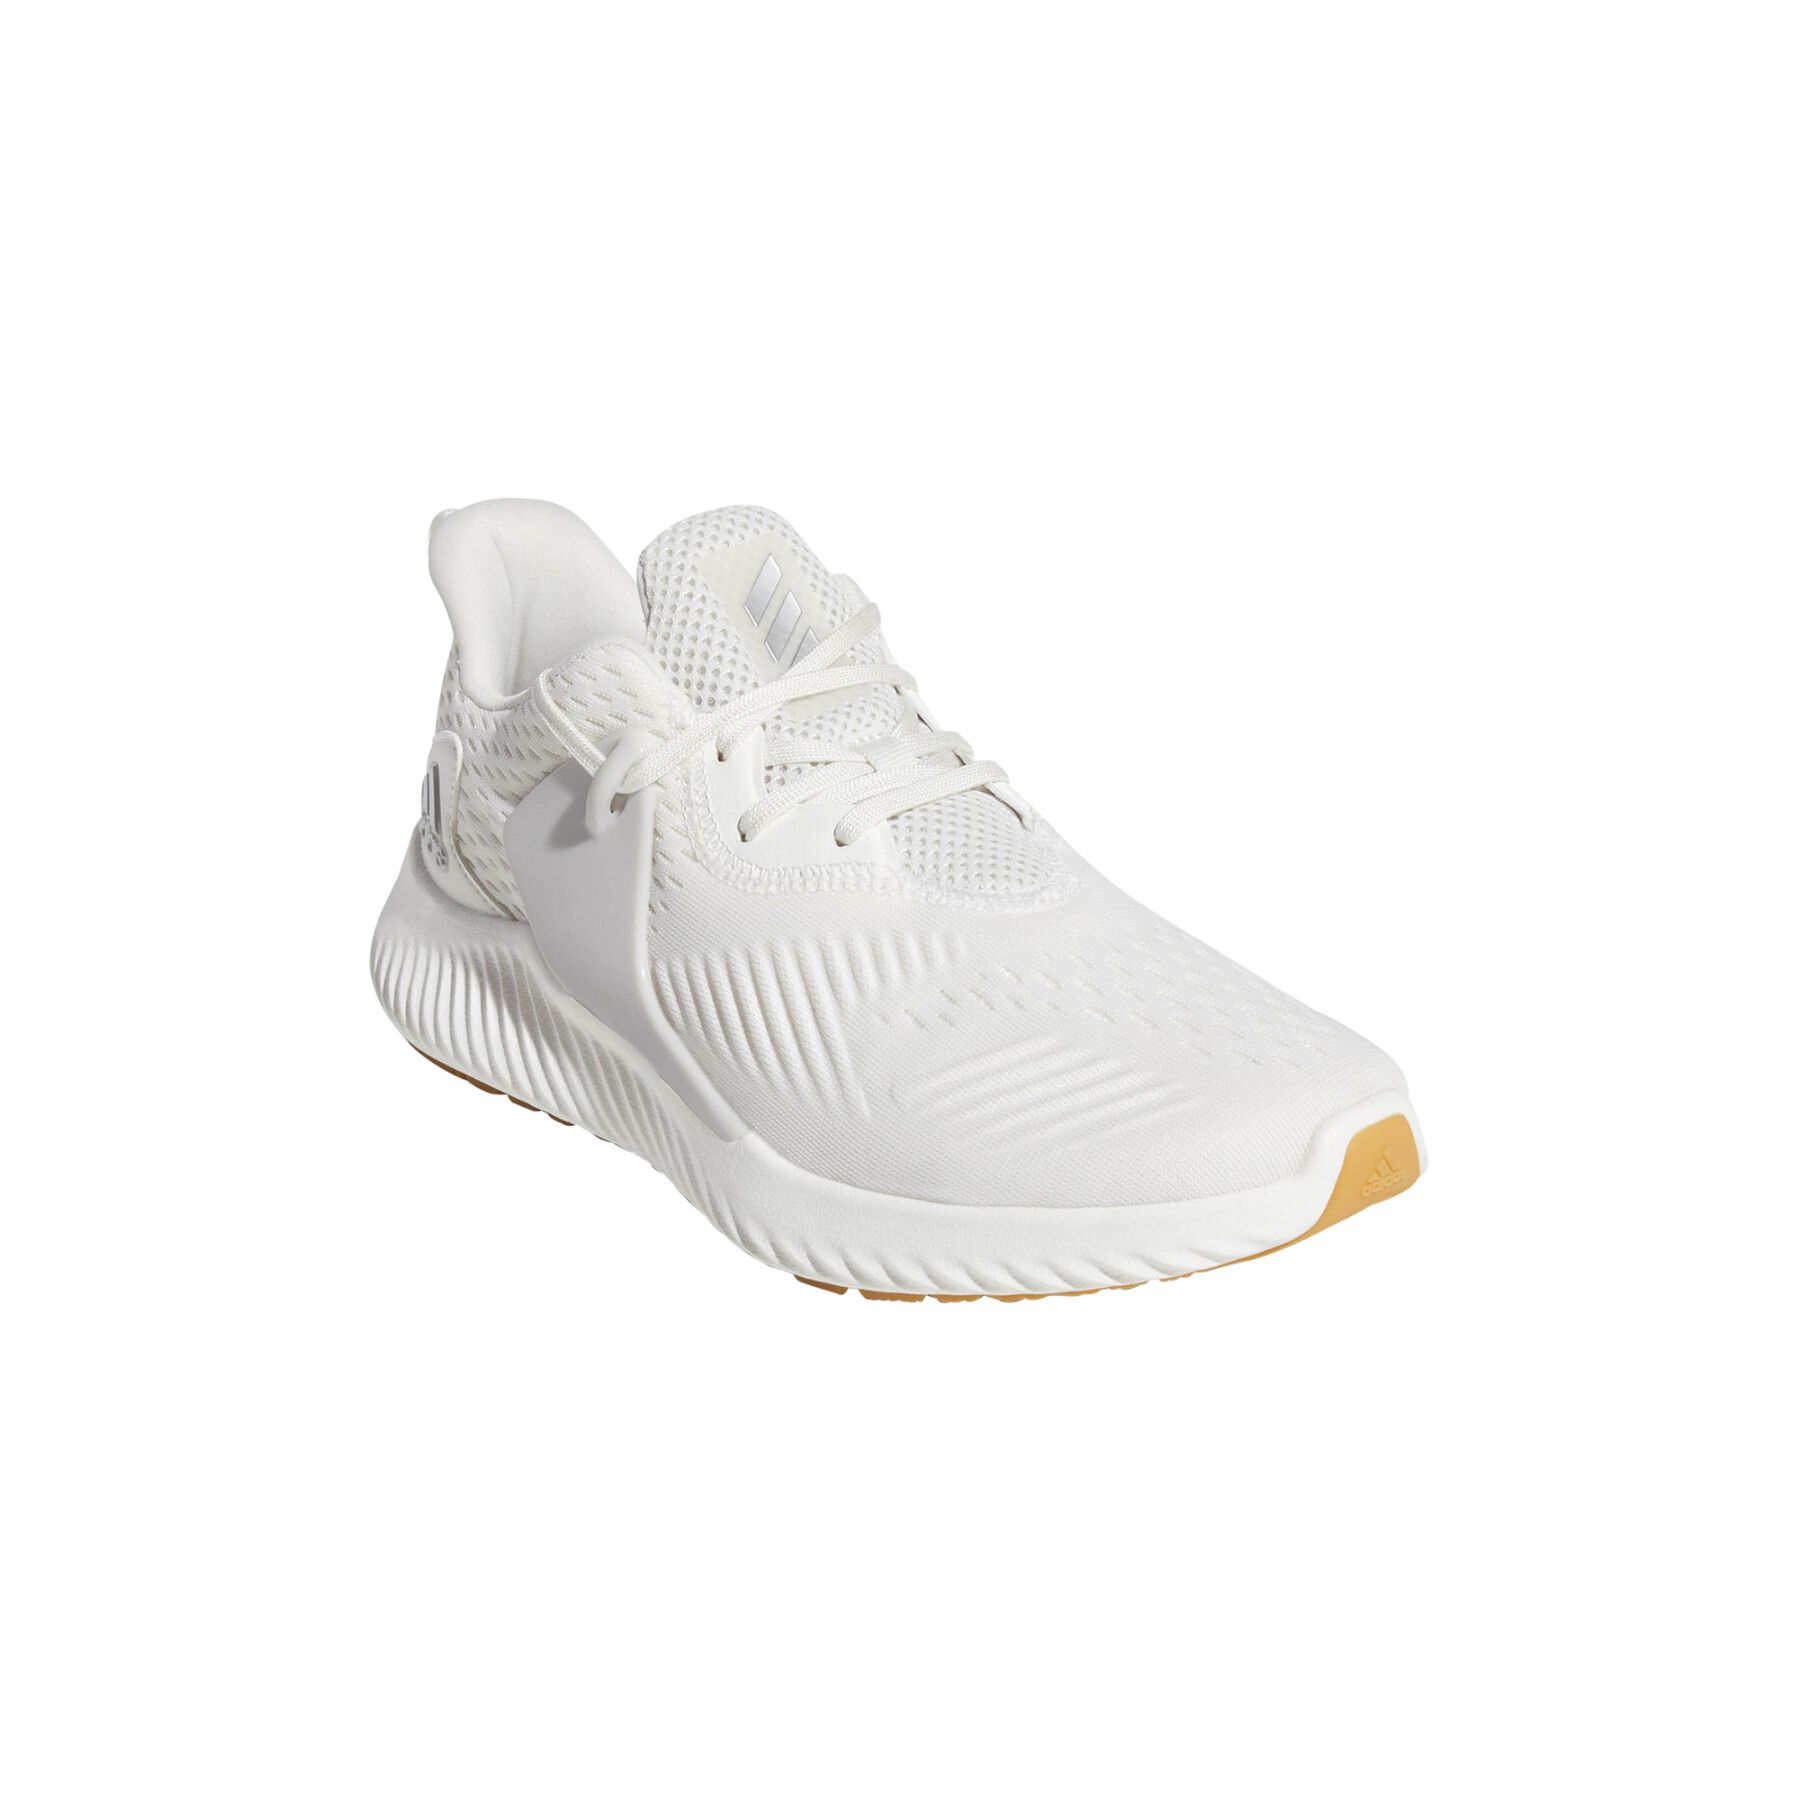 Chaussures femme adidas Alphabounce RC 2.0